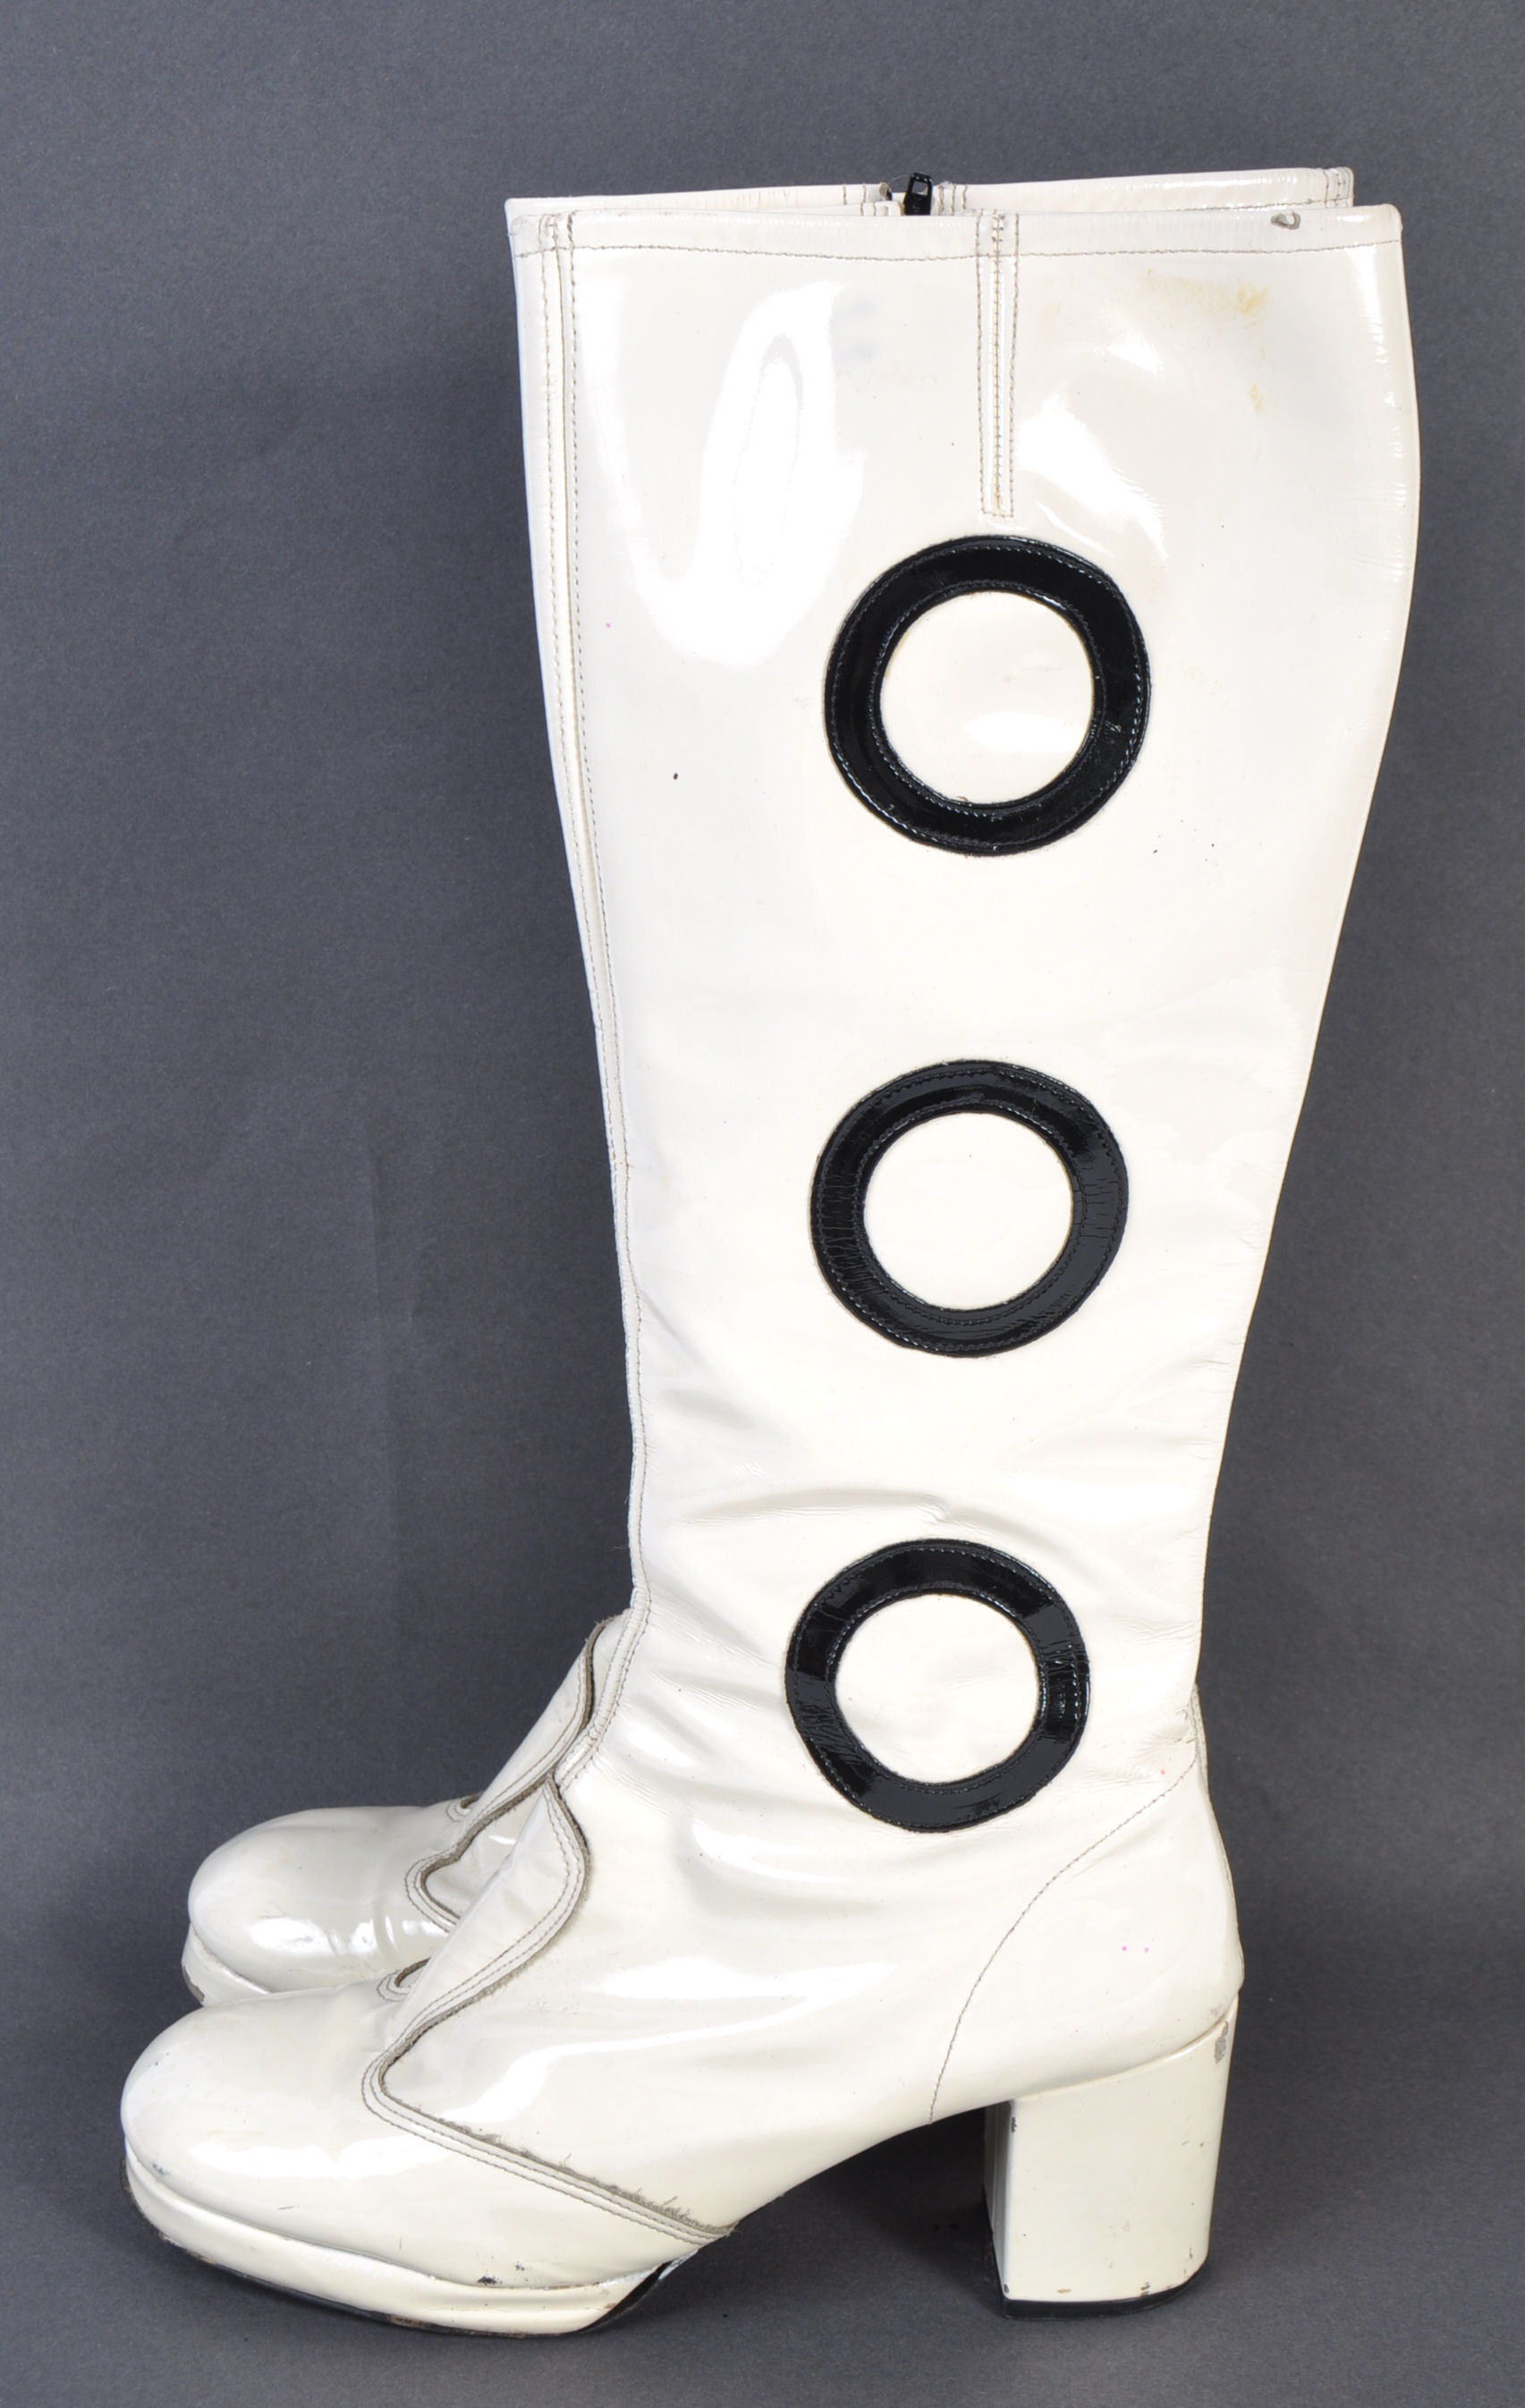 UNIFORMS AND FANCY DRESS - A PAIR OF WHITE RETRO VINATEB 1960S LADIES GOGO BOOTS. - Image 2 of 7